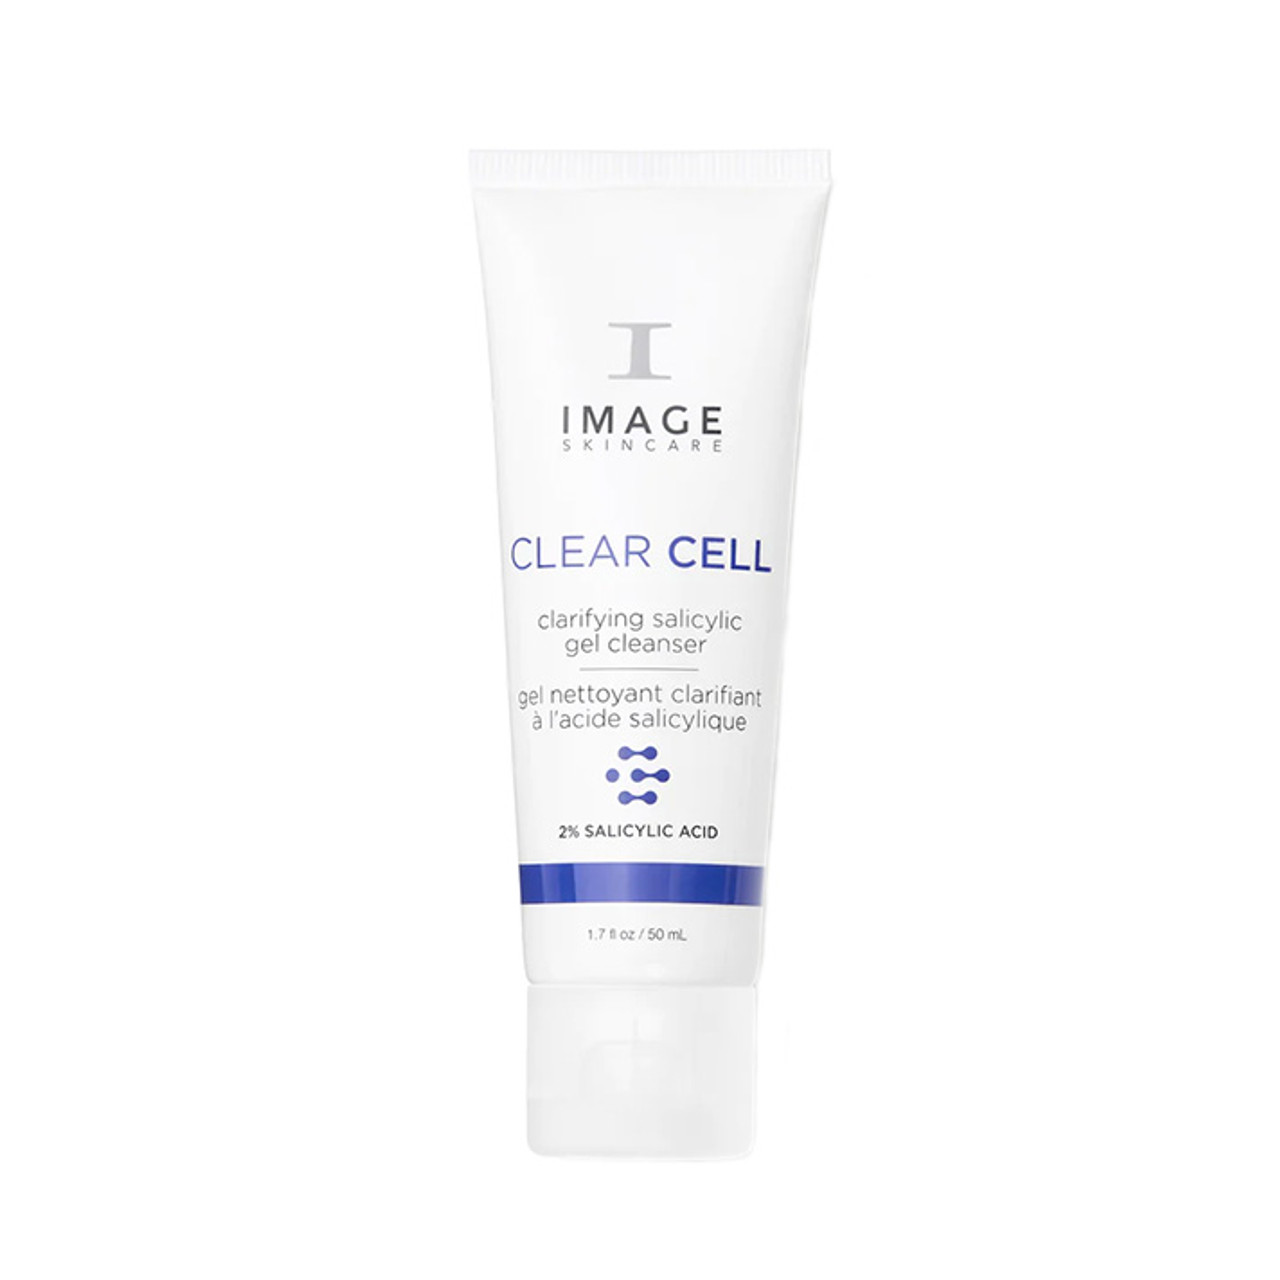 Image Skincare Clear Cell Salicylic Gel Cleanser - 1.7 oz (CC-200) (Unboxed)